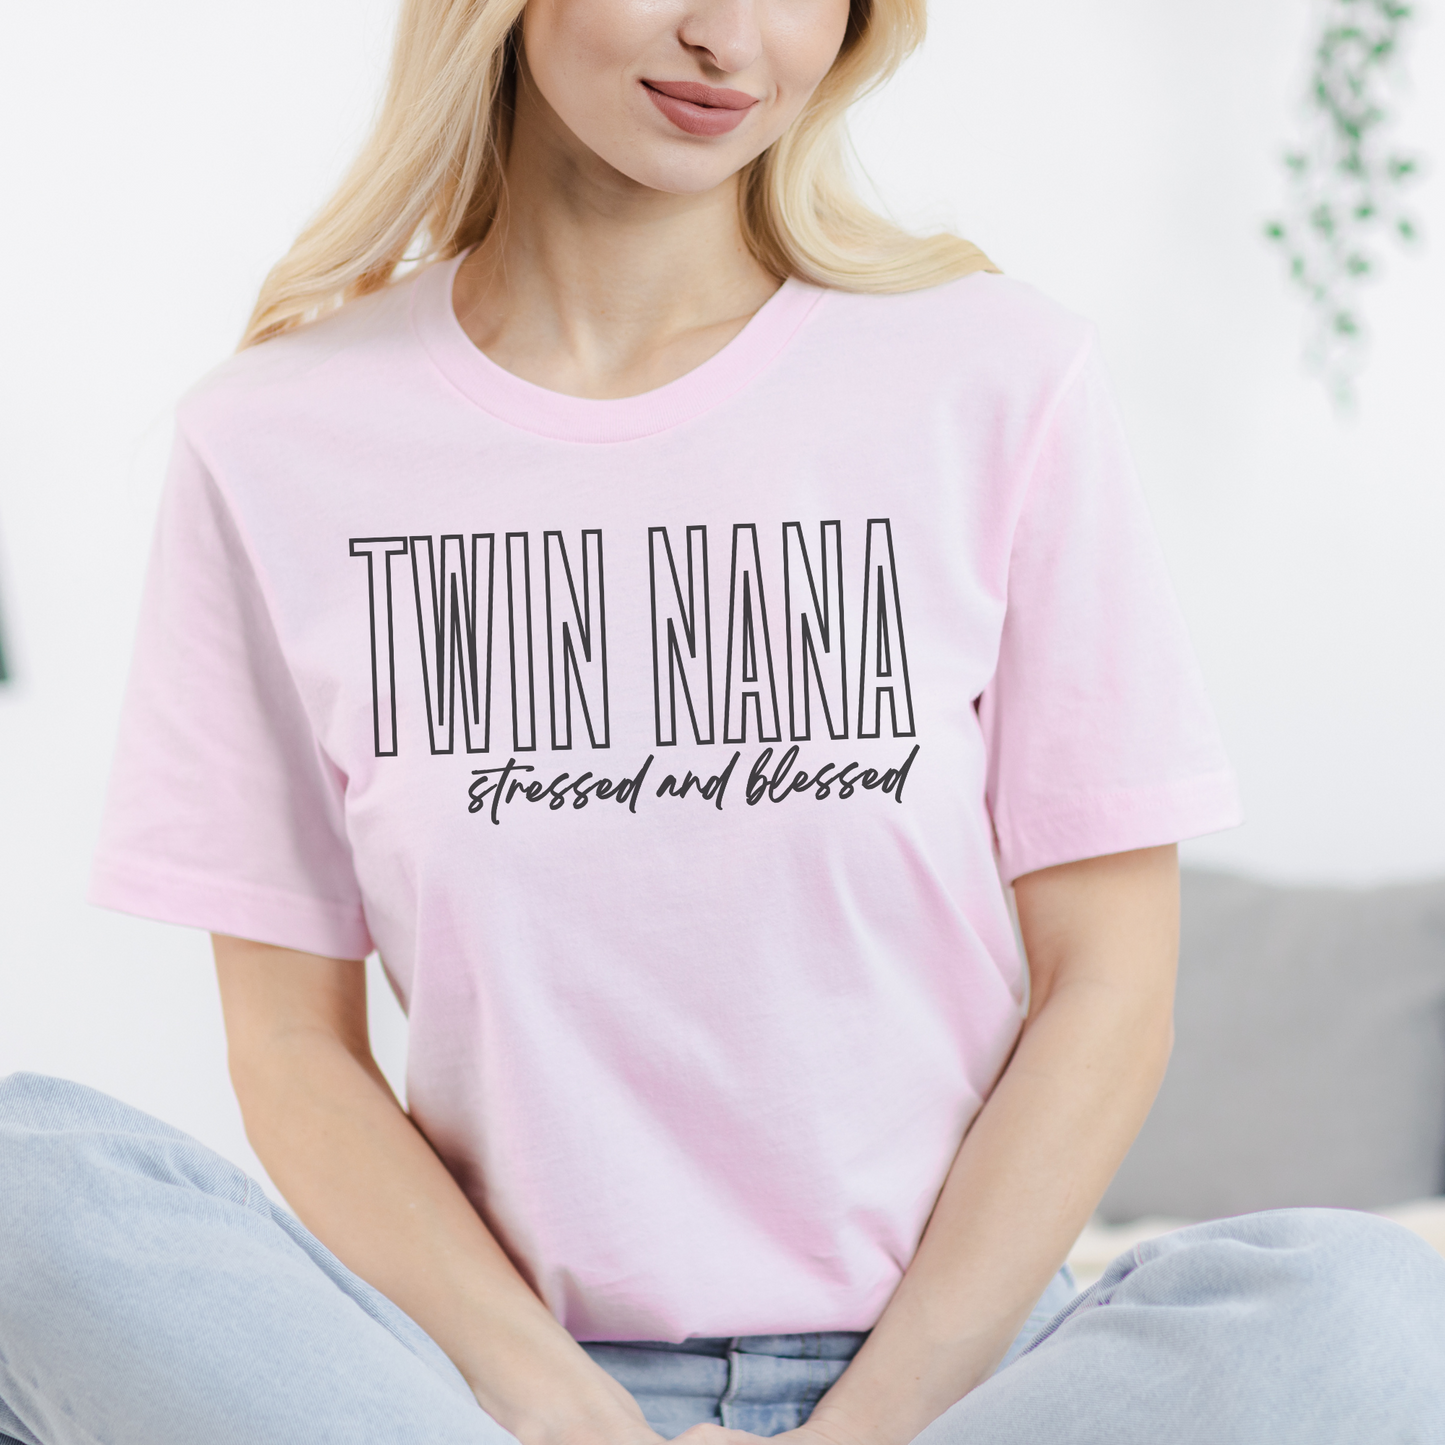 Twin Nana Stressed and Blessed Black Block Hollow Letters Paint Style Script Unisex Jersey Short Sleeve Tee Small-3XL Multiples